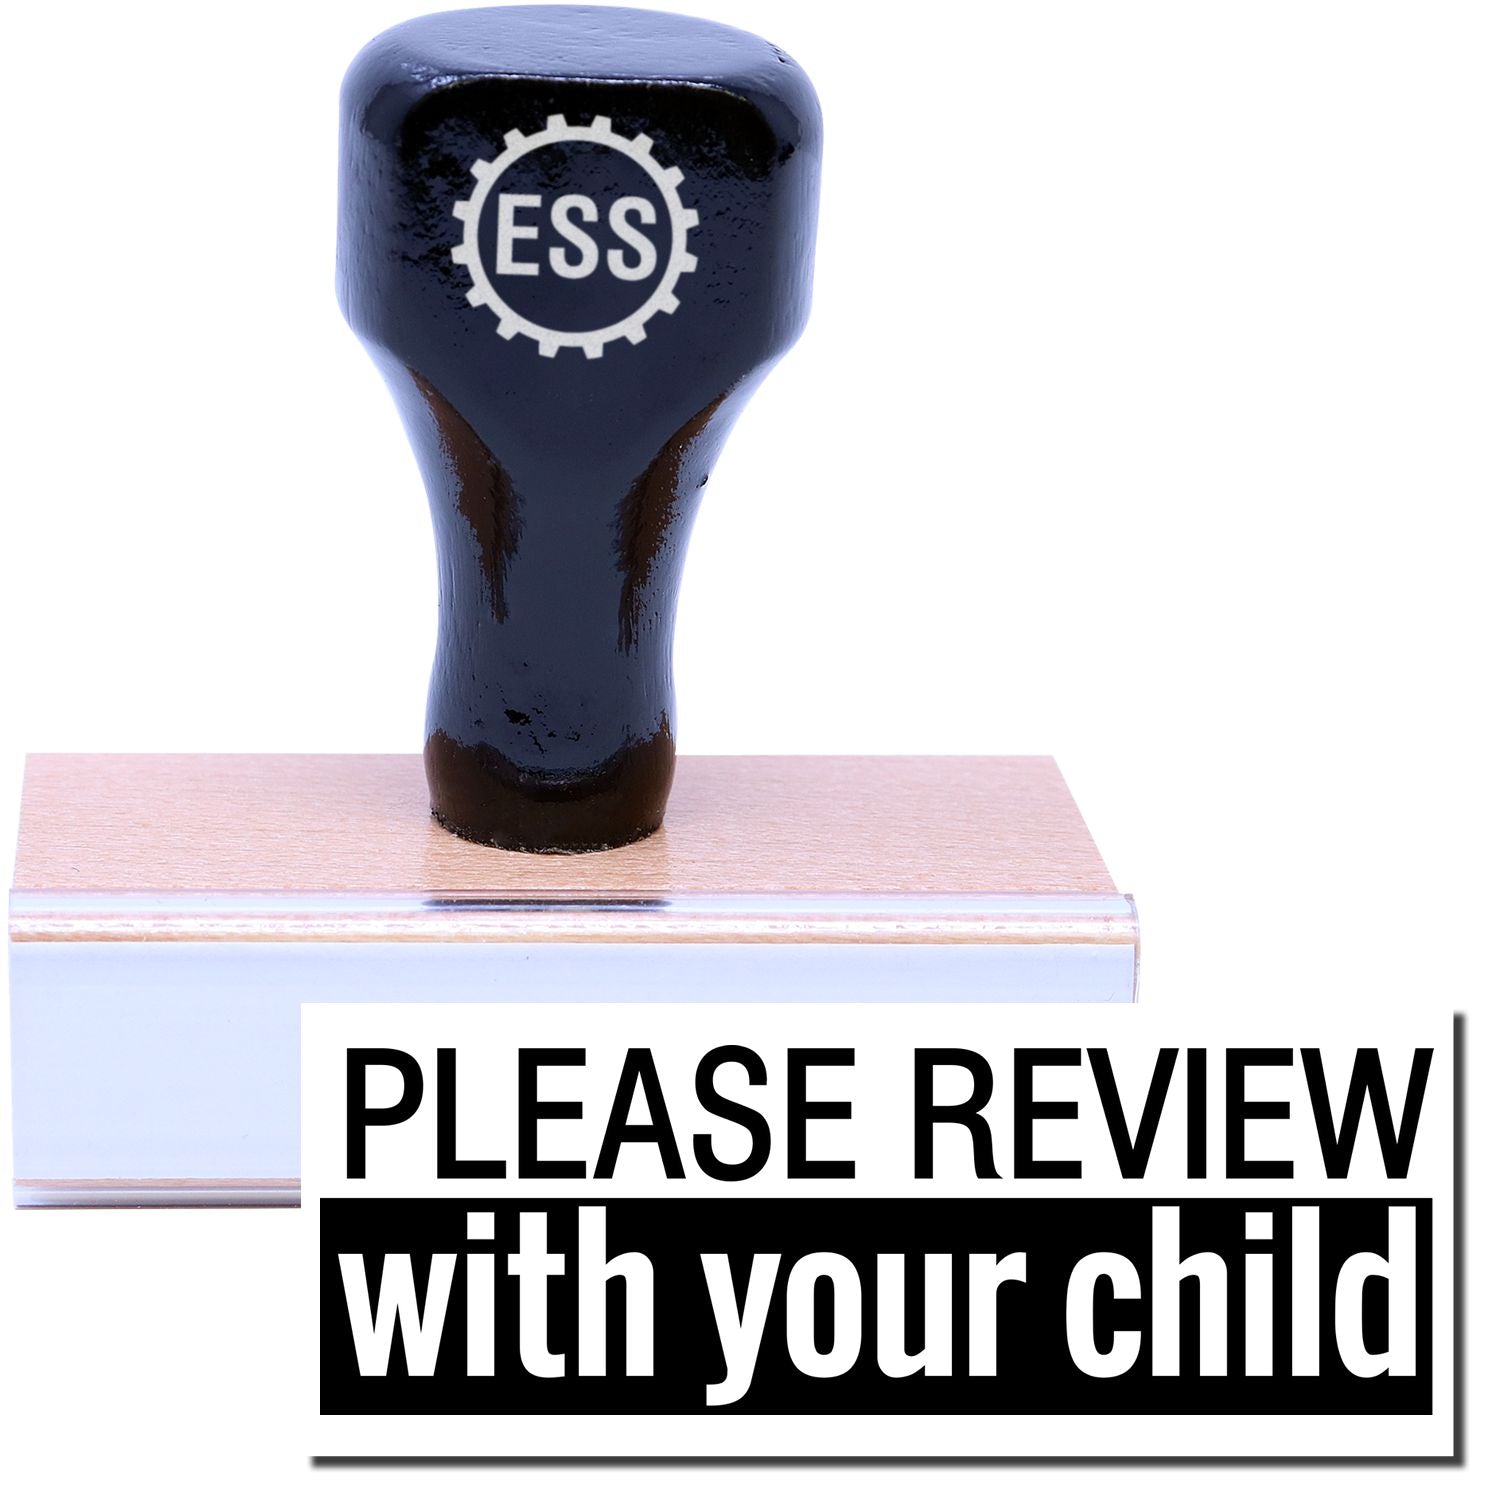 A stock office rubber stamp with a stamped image showing how the text "PLEASE REVIEW with your child" in a bold font and dual-colored marking is displayed after stamping.